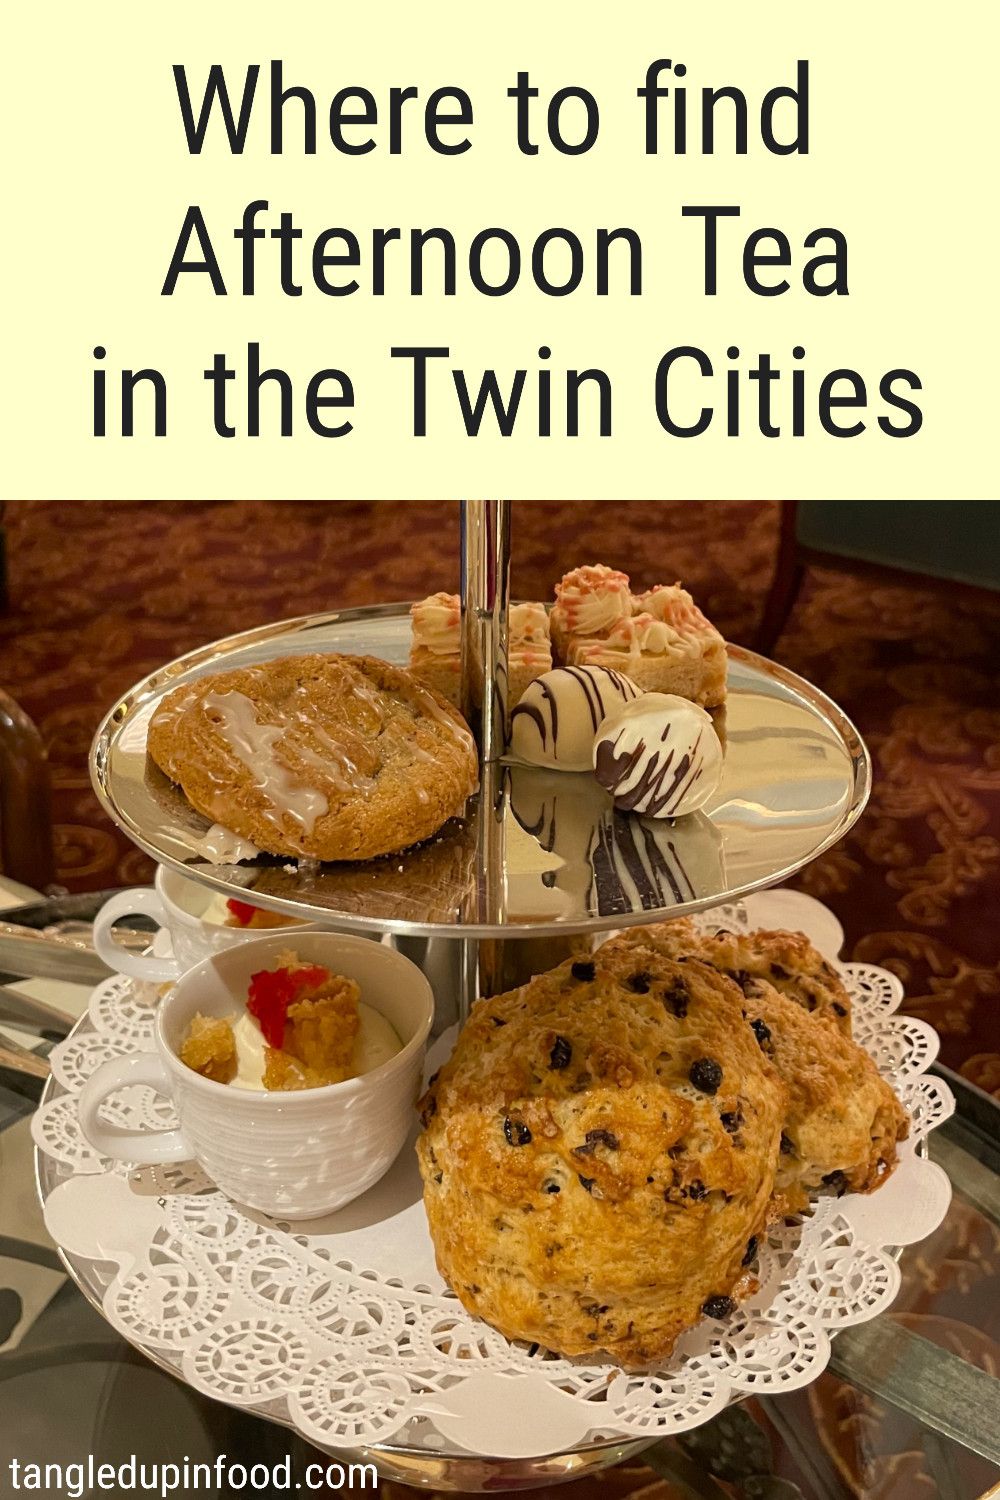 Photo of a tea tower with desserts and scones and text reading "Where to find Afternoon Tea in the Twin Cities"